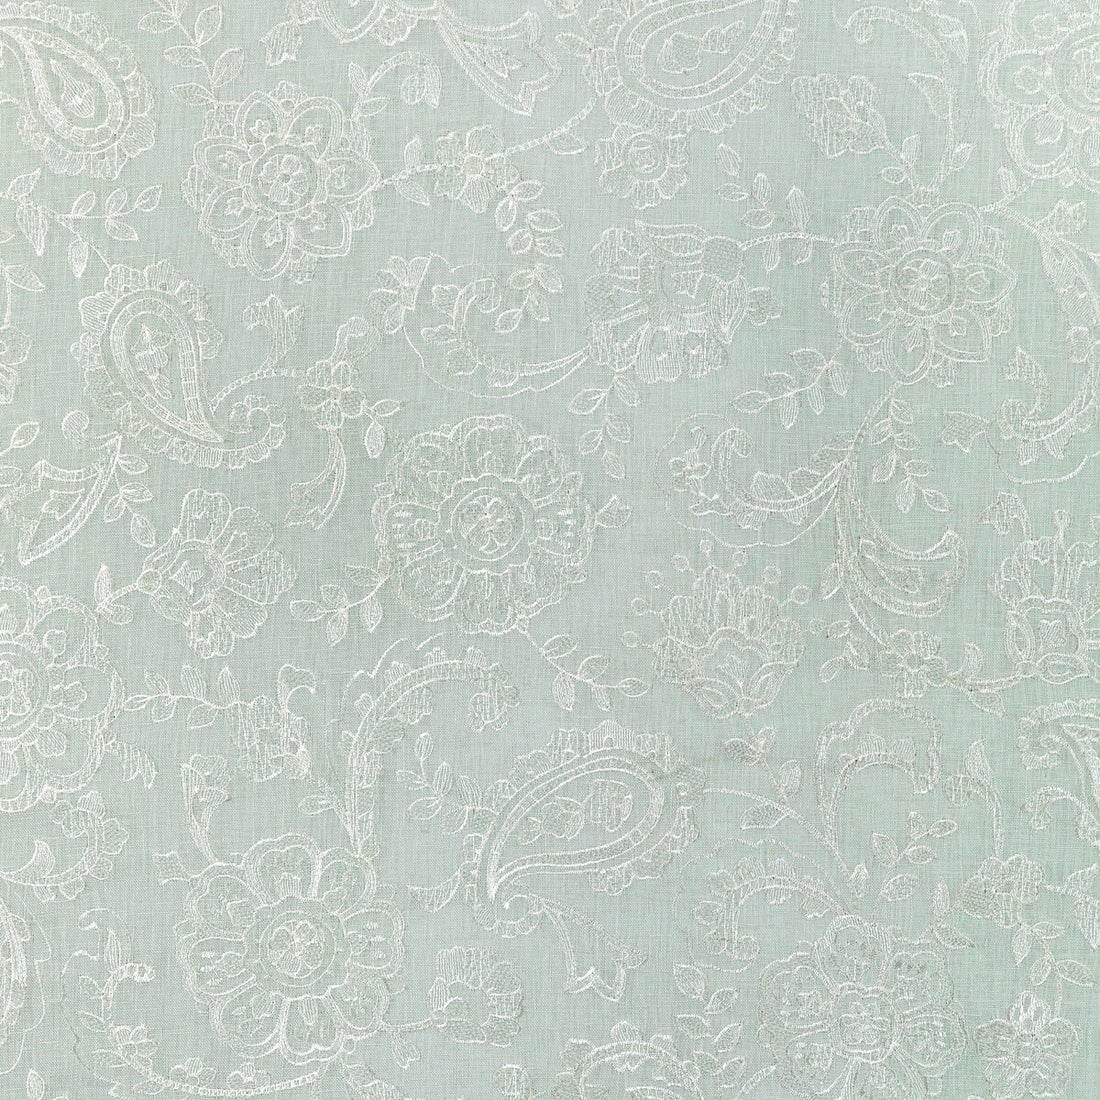 Varley Sheer fabric in seaglass color - pattern 2021128.123.0 - by Lee Jofa in the Summerland collection